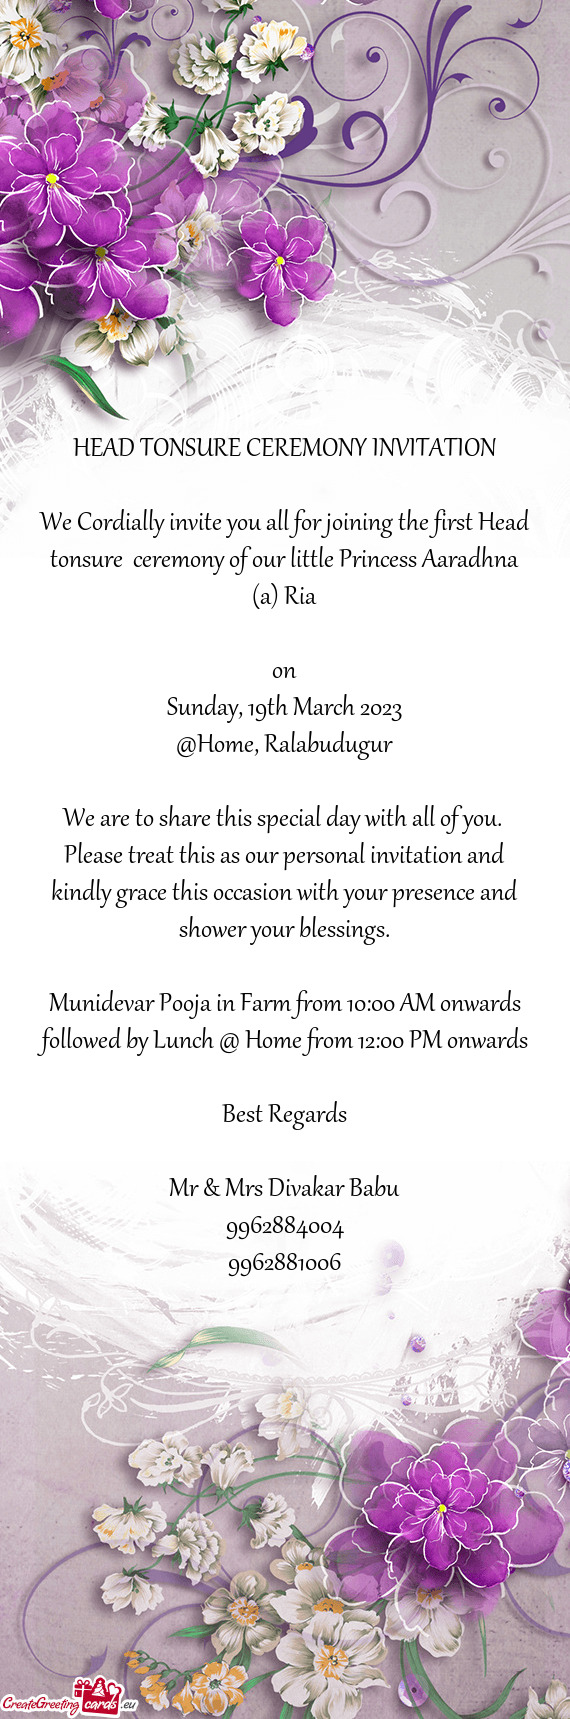 Munidevar Pooja in Farm from 10:00 AM onwards followed by Lunch @ Home from 12:00 PM onwards